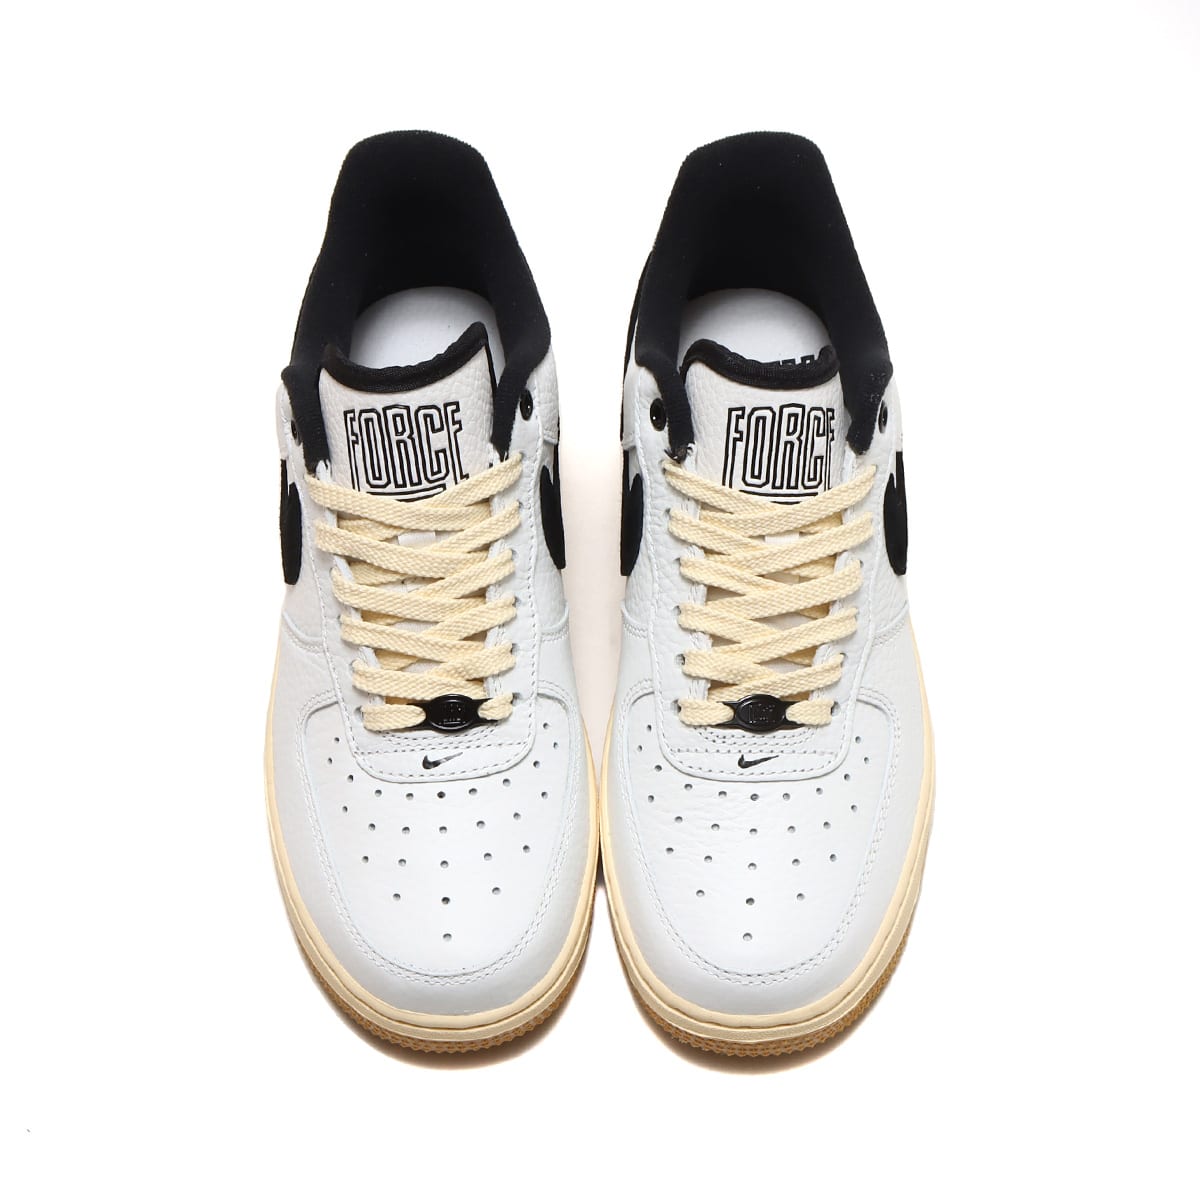 NIKE WMNS AIR FORCE 1 07 LX"Reveal"